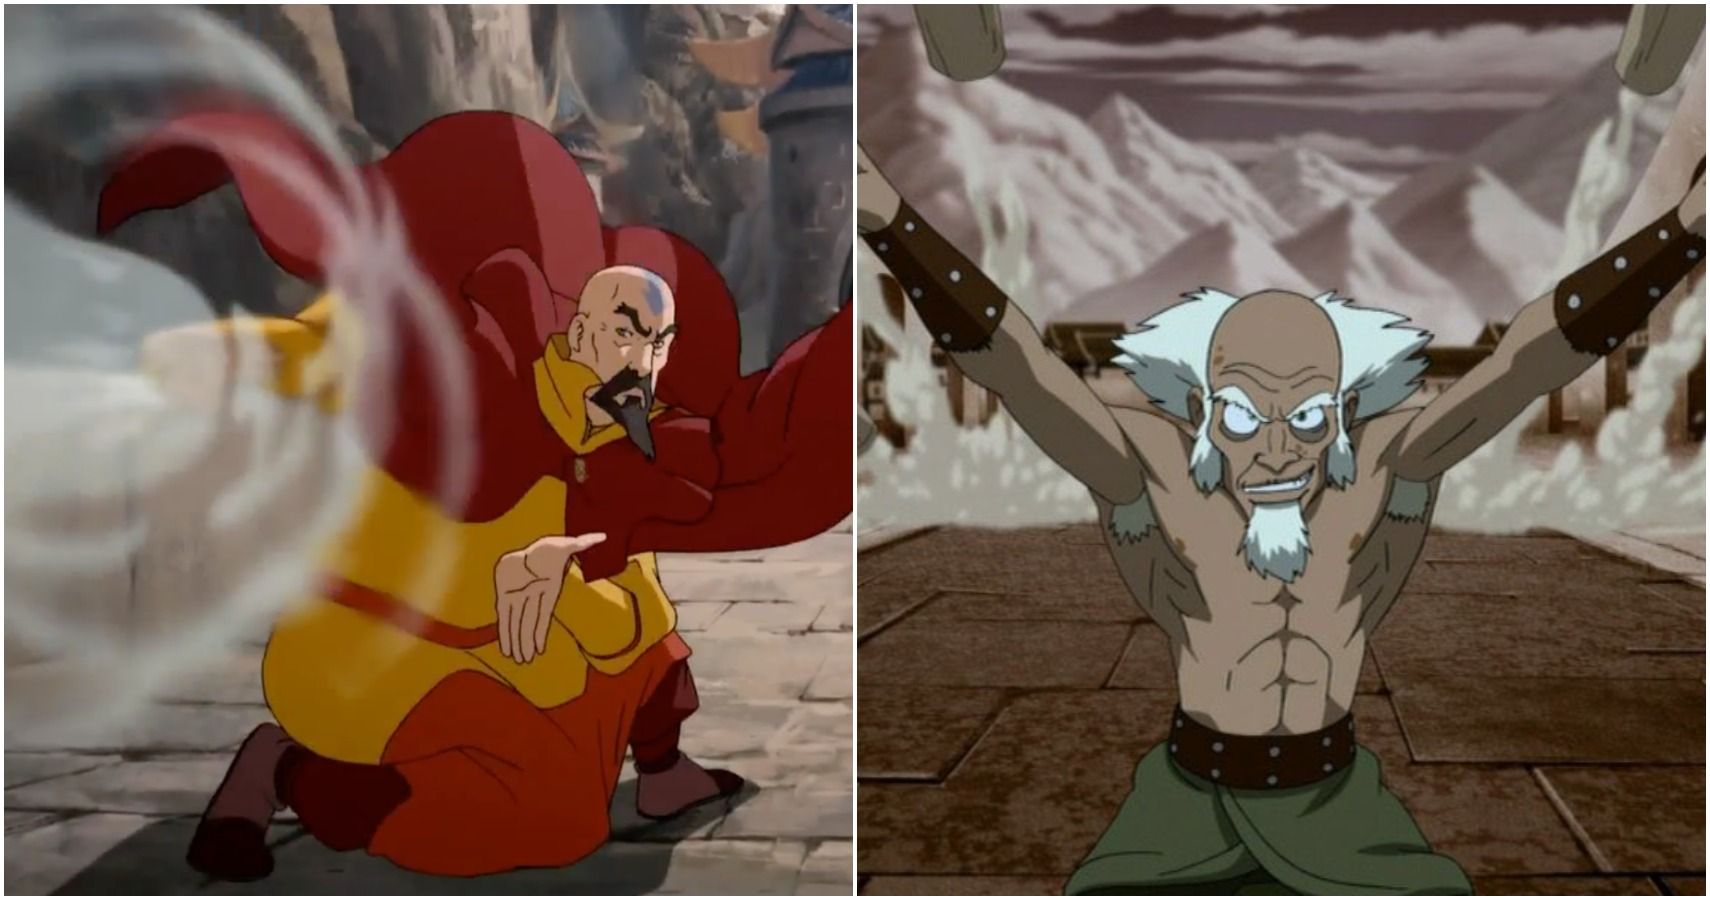 Avatar The 10 Oldest Benders In The Franchise